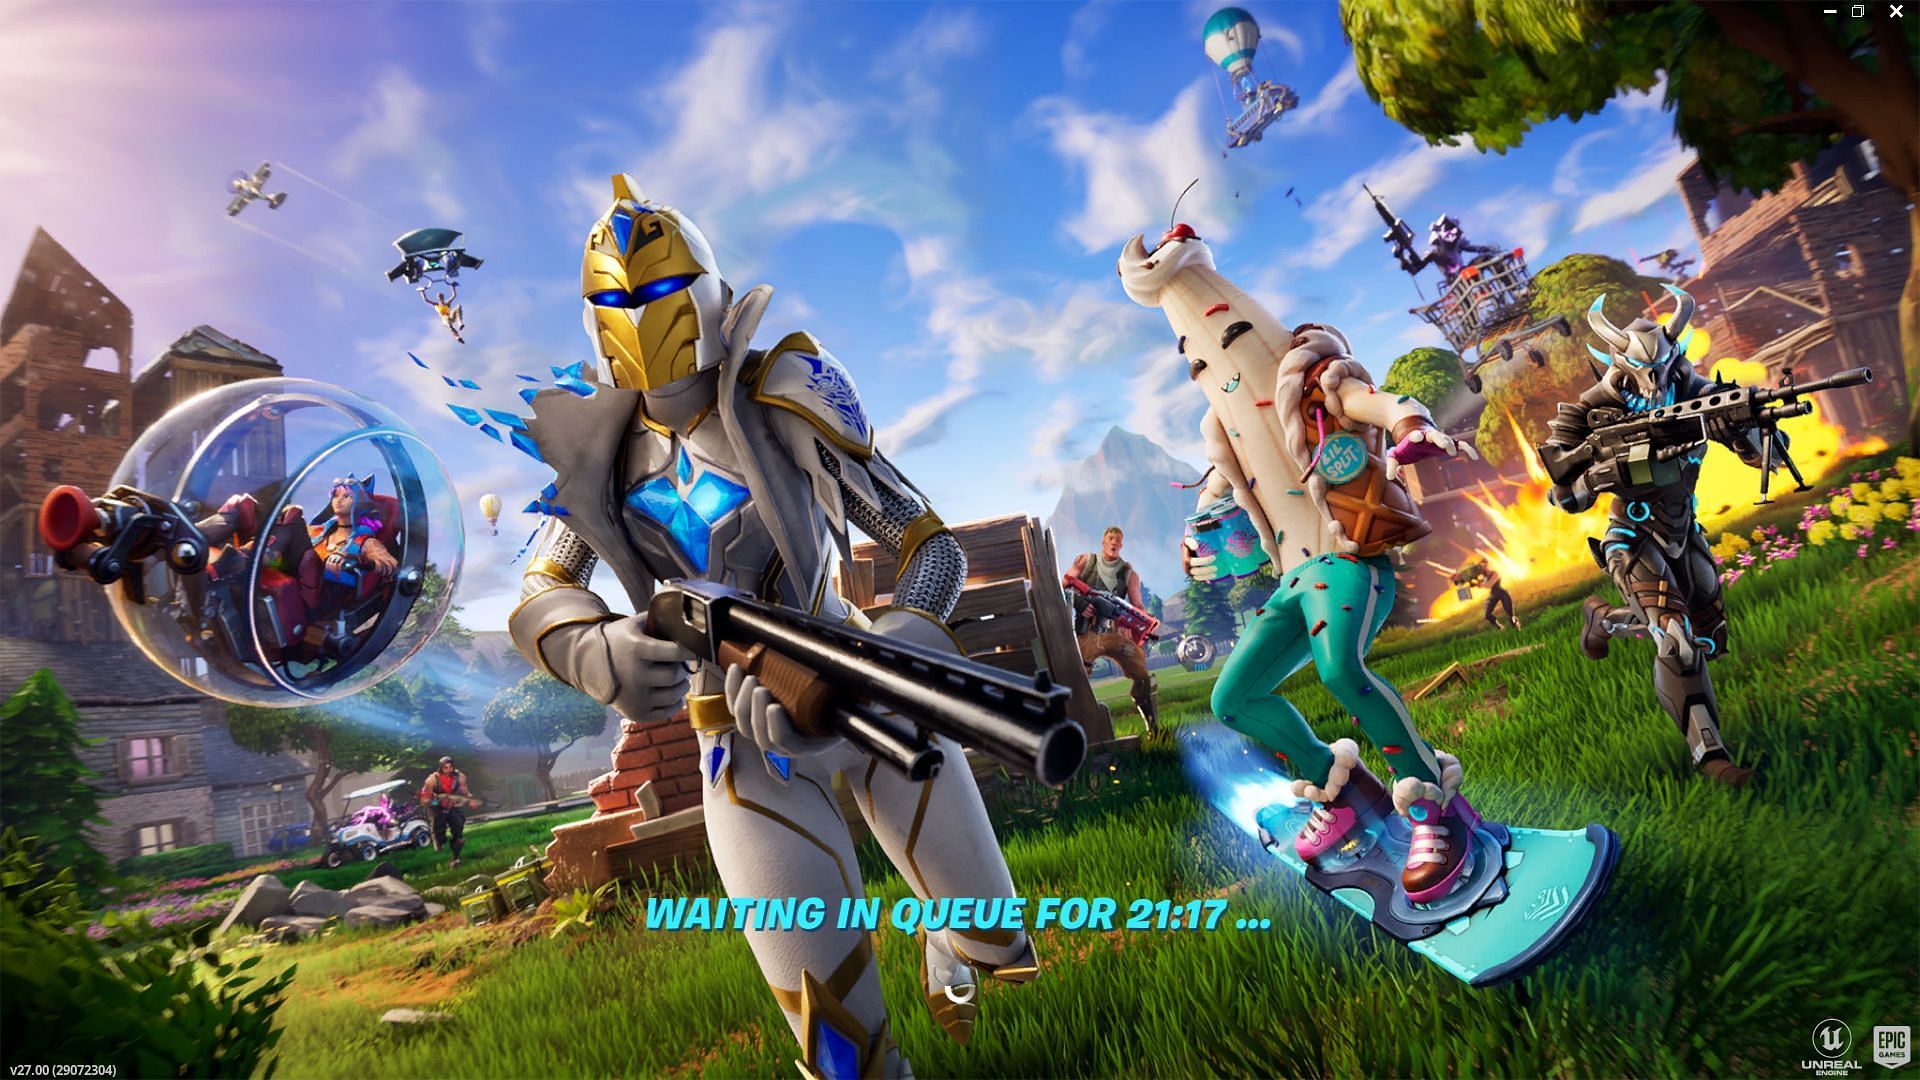 Fortnite Chapter 4 Season 5 waiting in queue screens are driving players insane (Image via Epic Games/Fortnite)